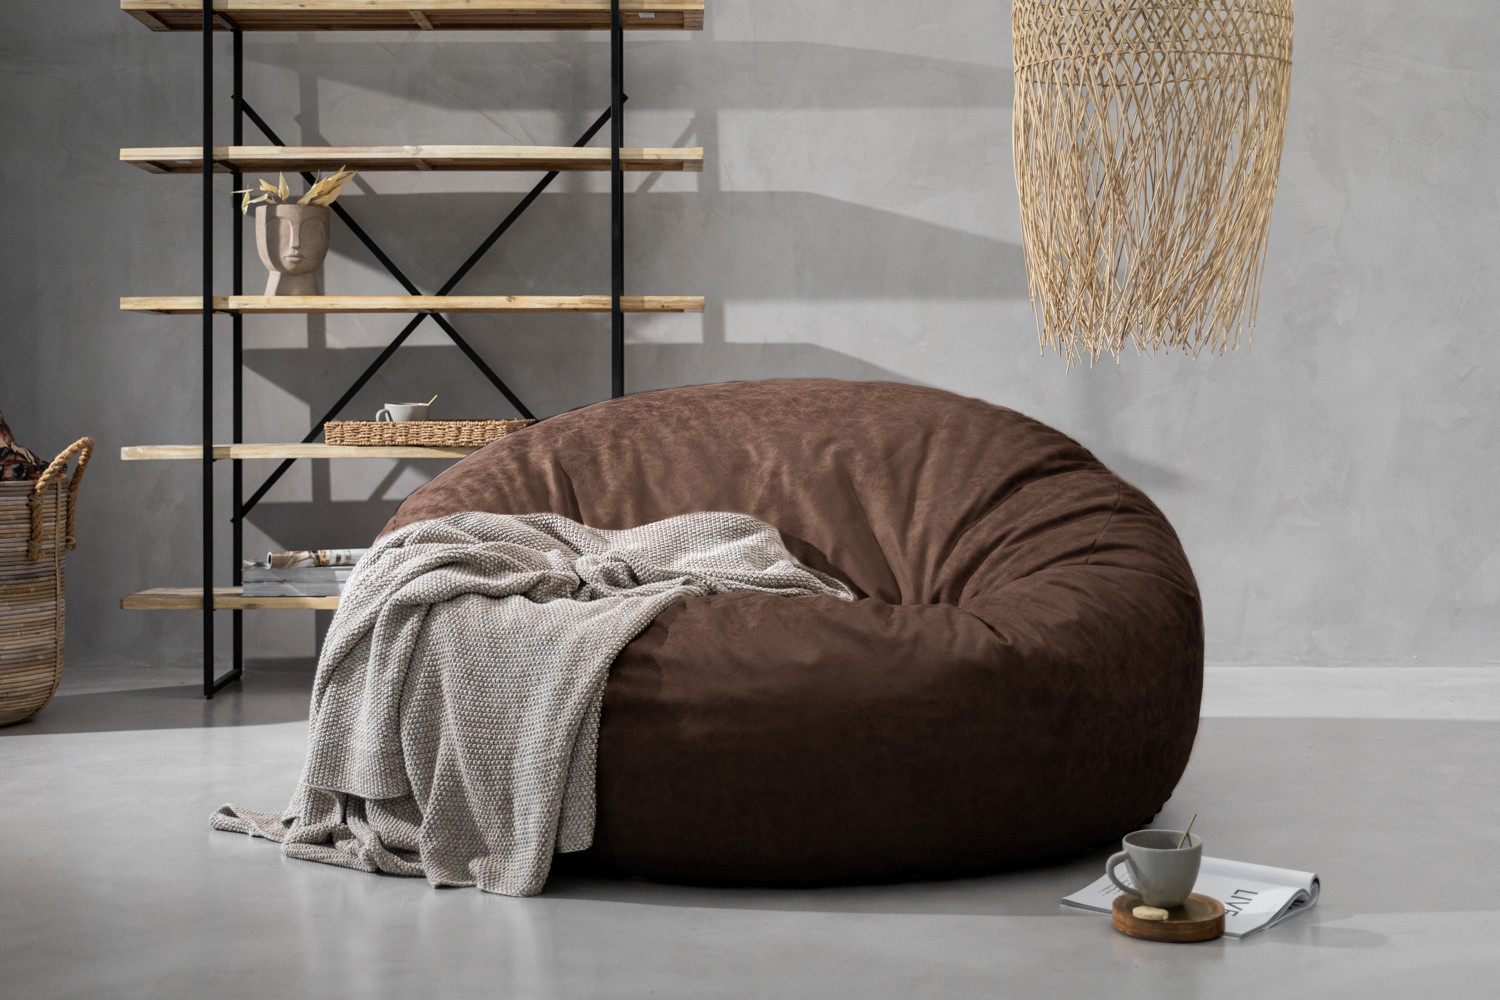 all Rest n Sleep Bean Bags Products and details - YouTube